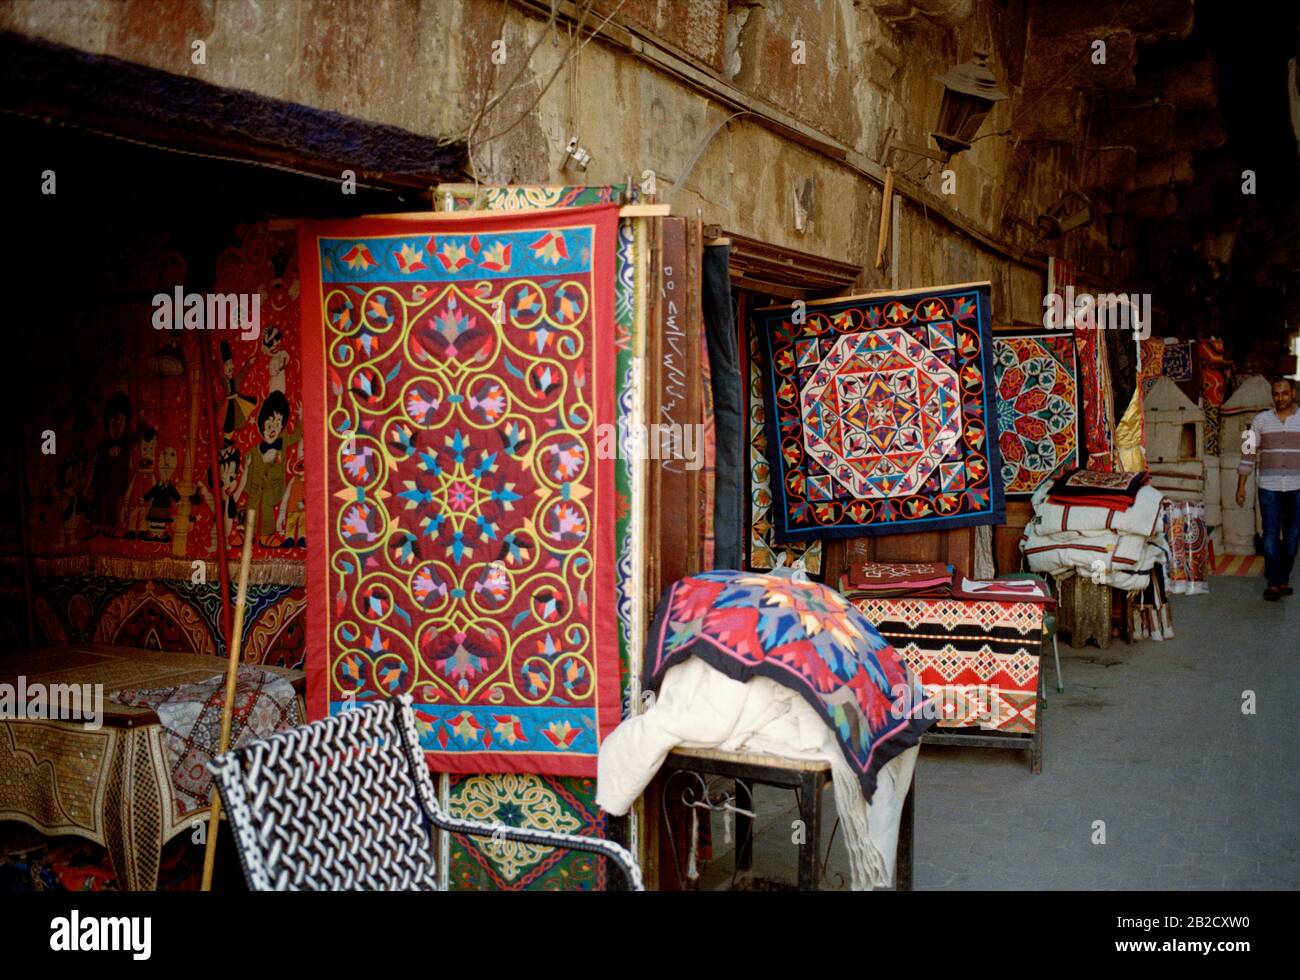 Travel - Street of the tentmakers Al Khayamiya in historic Qasaba of Radwan Bey a covered market souk bazaar in Islamic Cairo in Egypt in North Africa Stock Photo